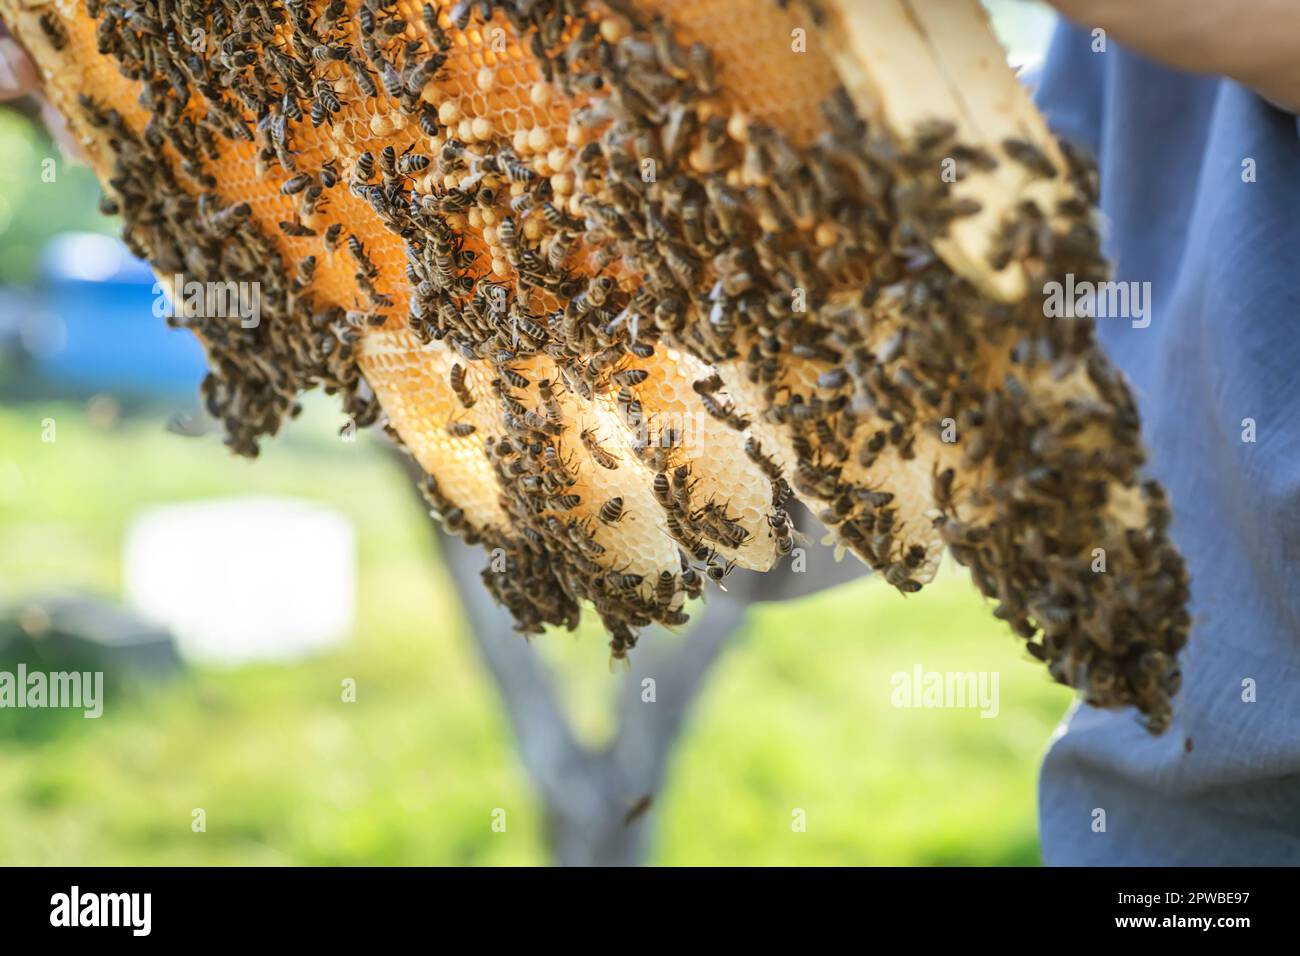 Farmer displaying a honeycomb frame filled with bounty of bee farm, a testament to skill and dedication an apiarist. Stock Photo